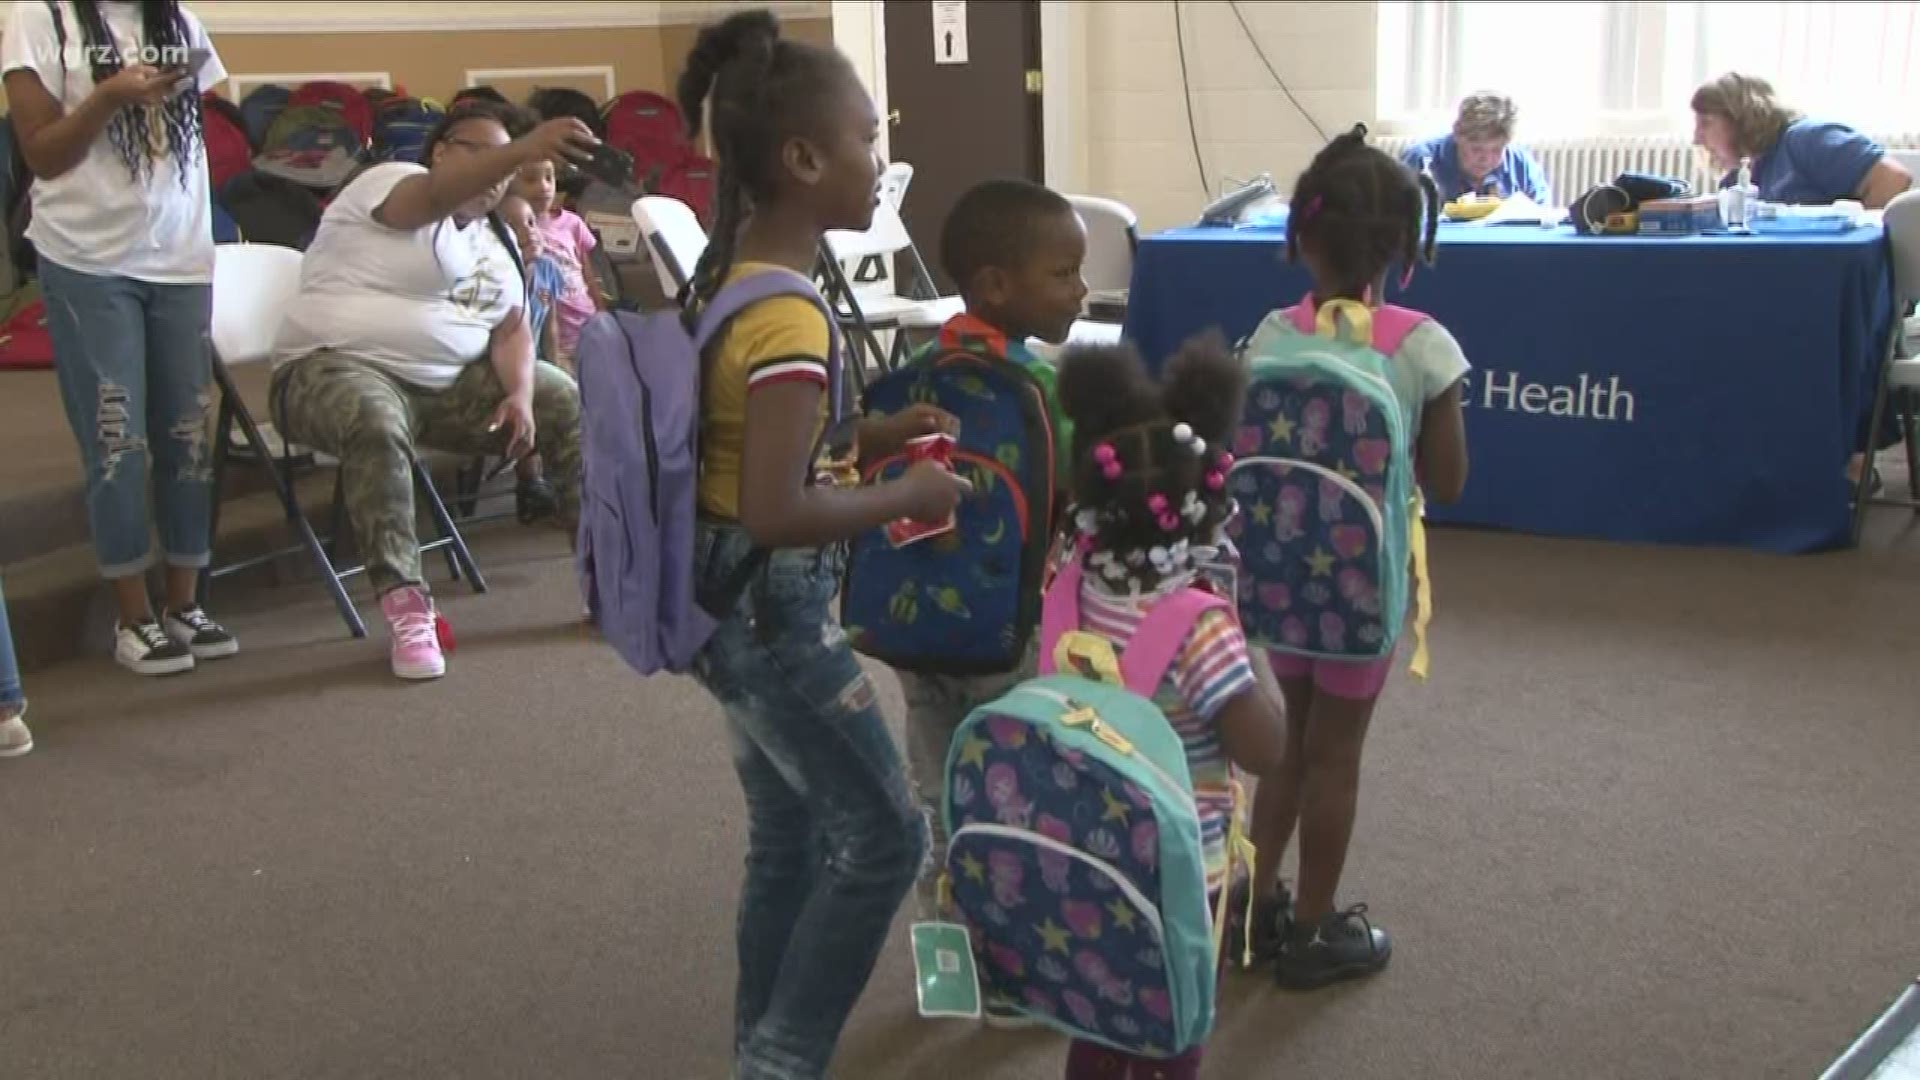 For over 30 years, Faith Bible Tabernacle Church in Buffalo has been giving out backpacks full of school supplies to children in need.